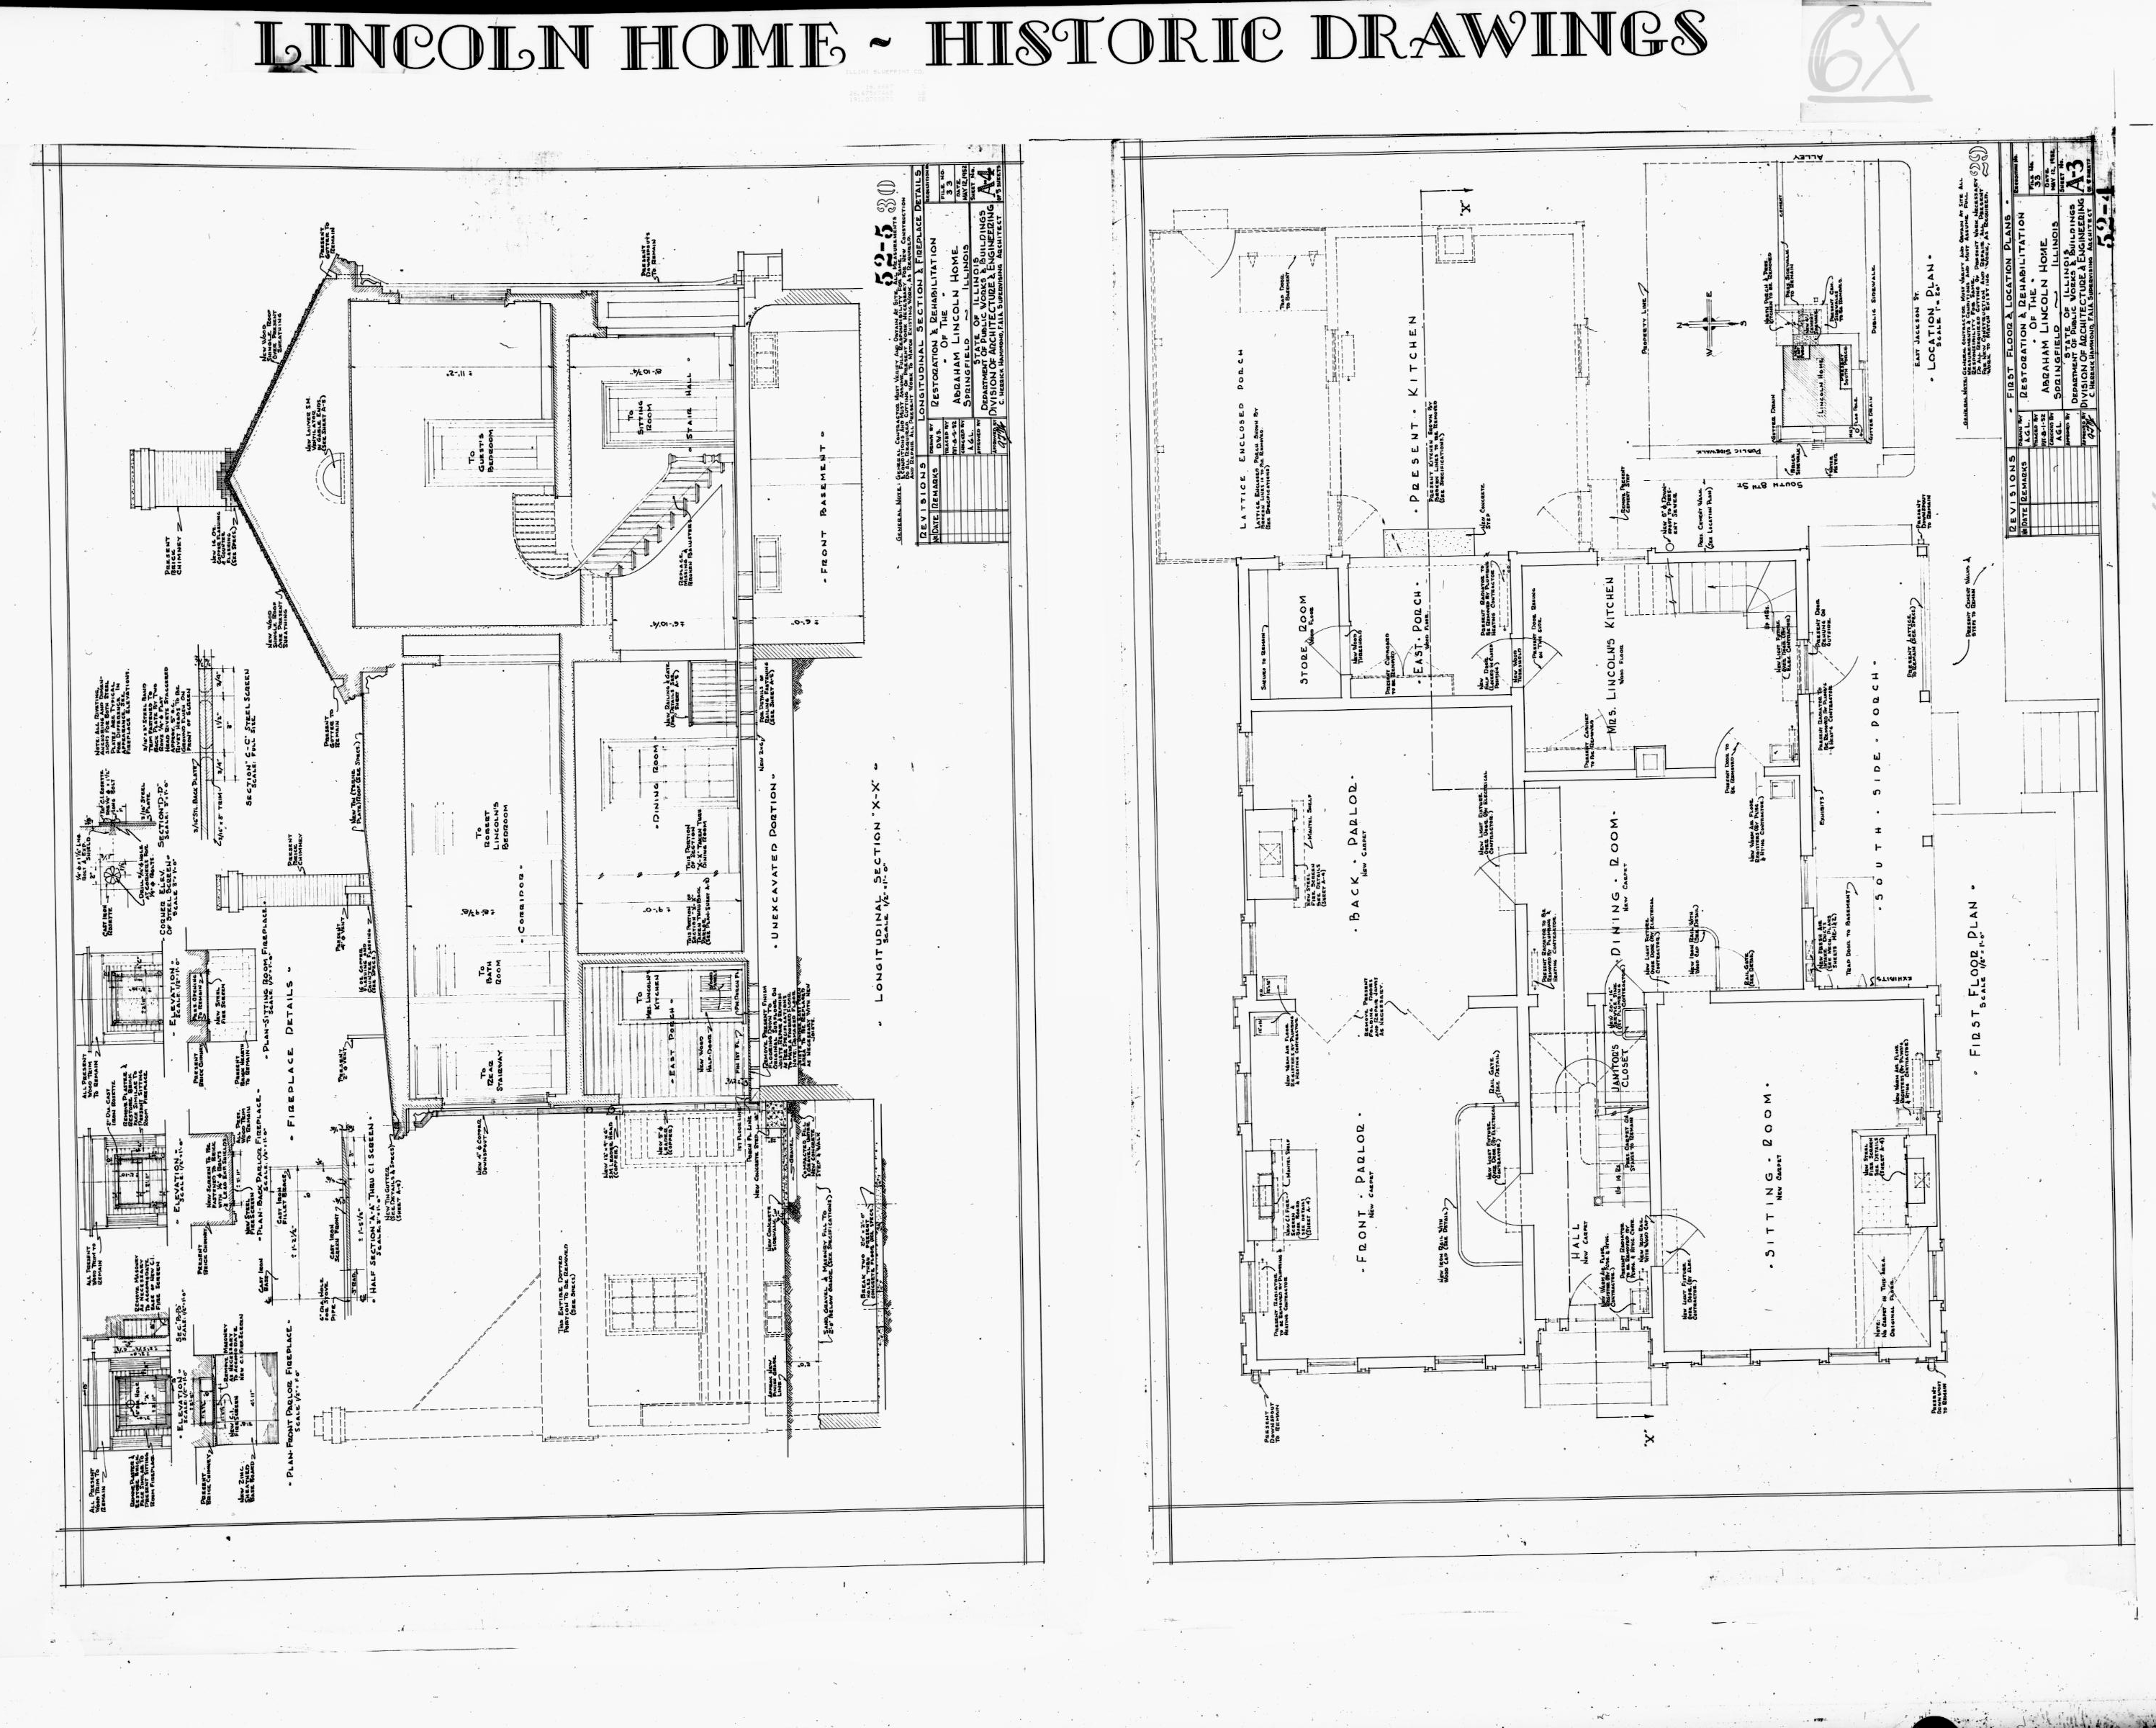 Lincoln Home - Historic Drawings 31 Lincoln, home, historic drawings, restoration & rehab, longitudinal section & fireplace, first floor plan and site plan